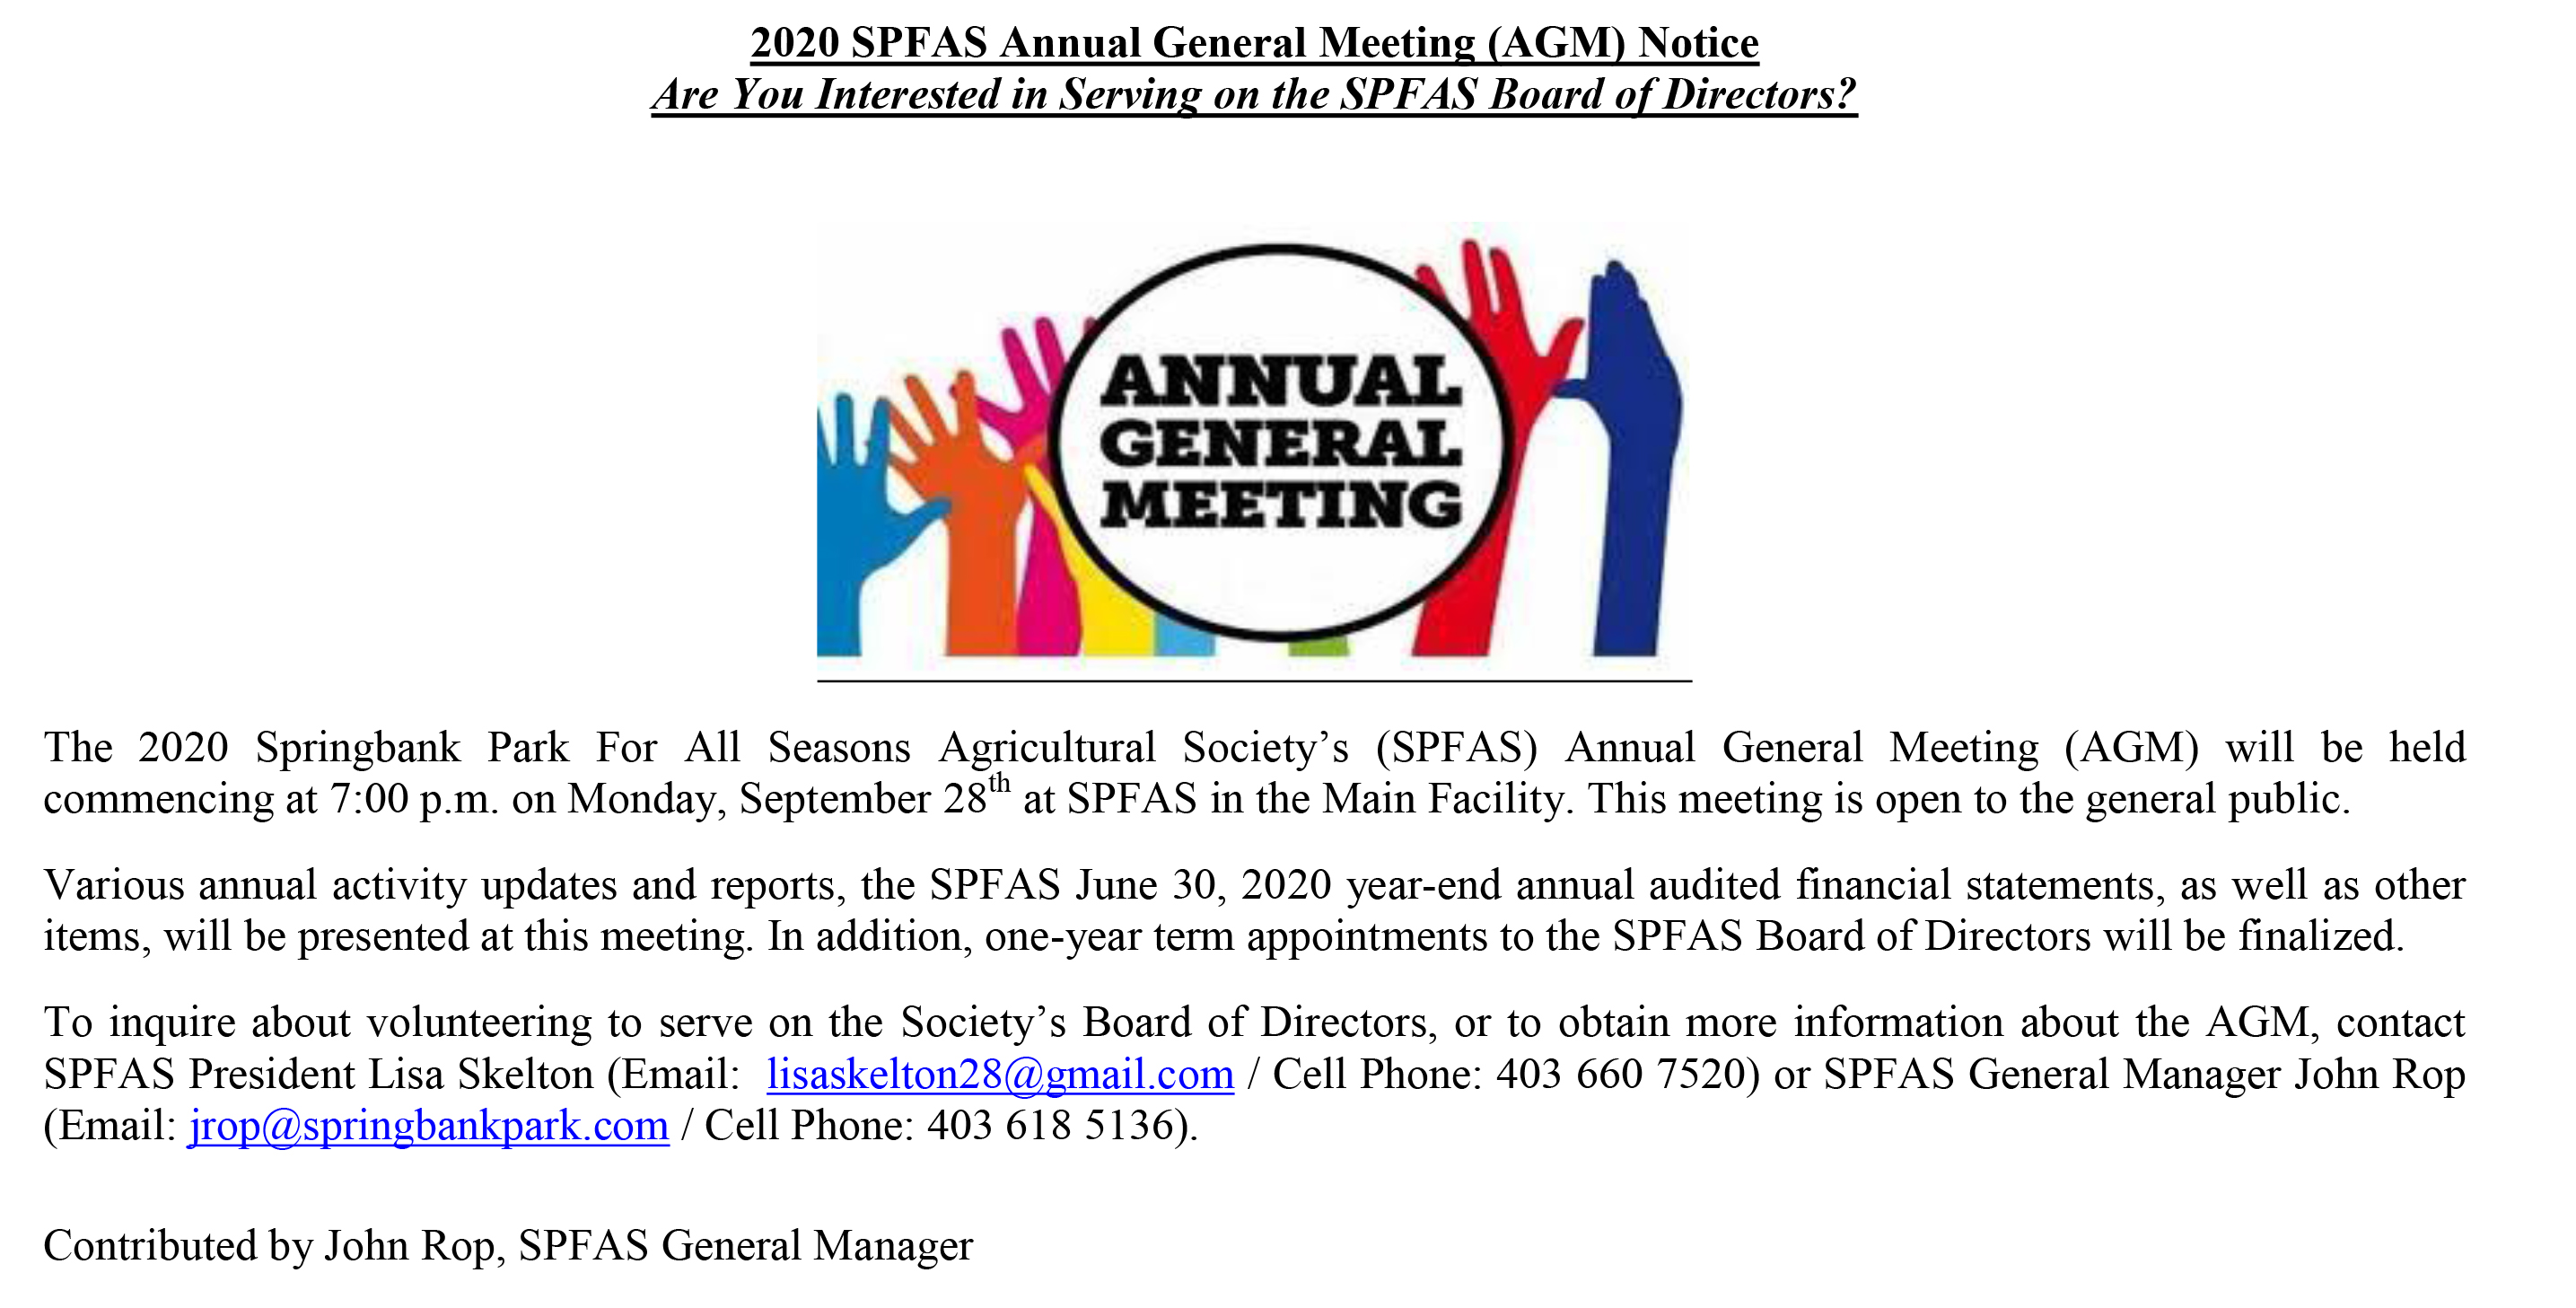 2020 SPFAS Annual General Meeting Notice for Aug 20 PP NL